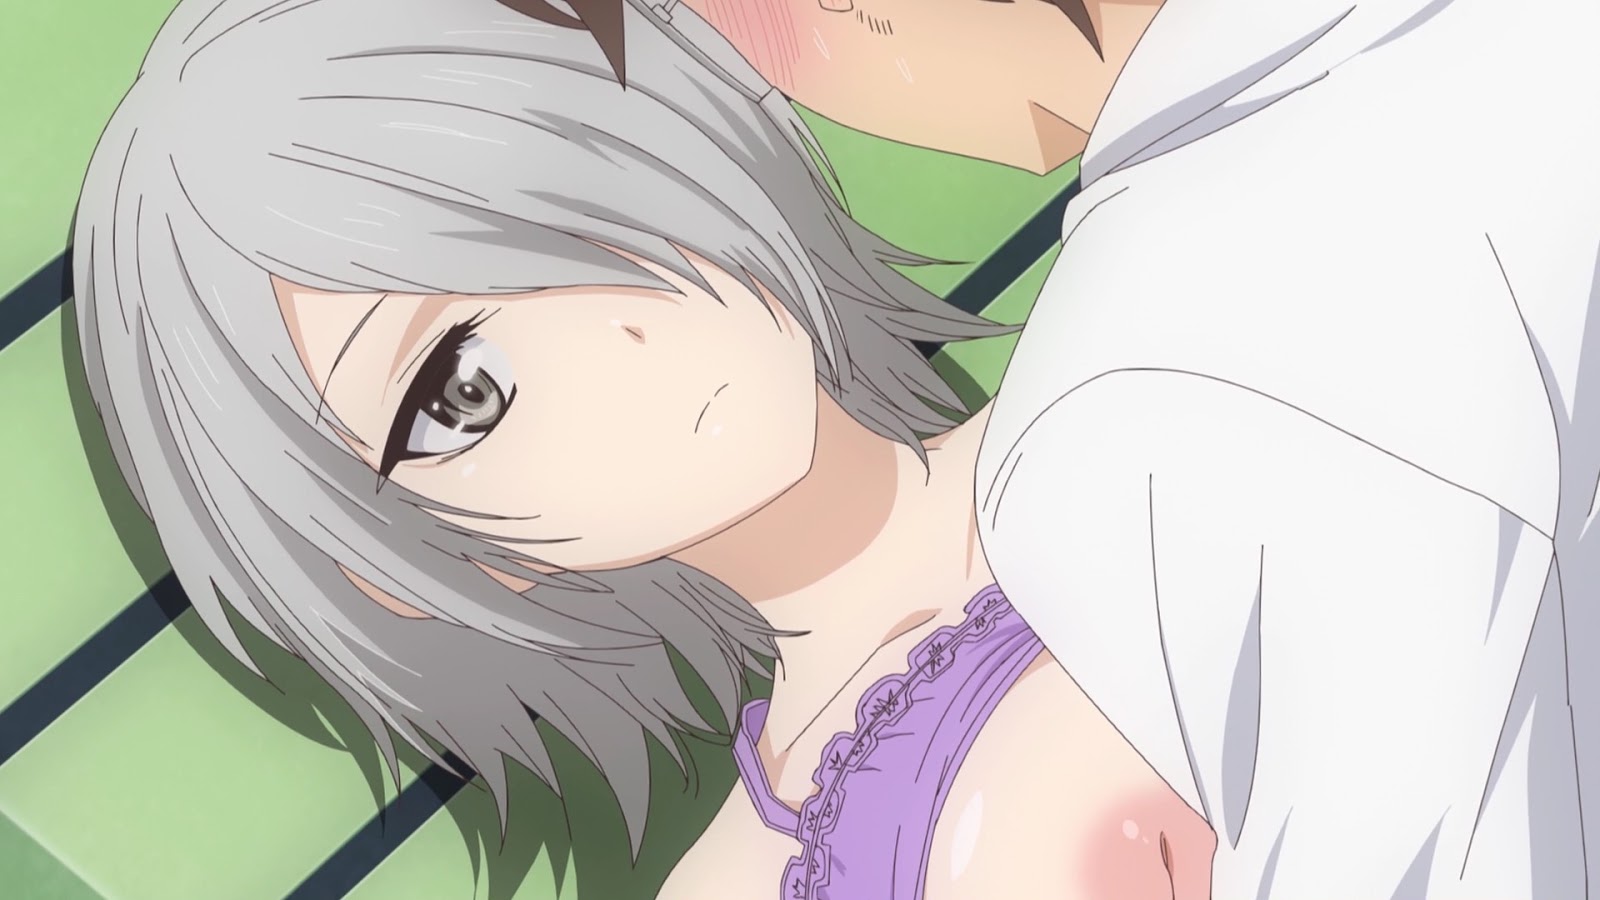 The uncensored Blu-rays made it clear that Chizuru has inverted nipples and...